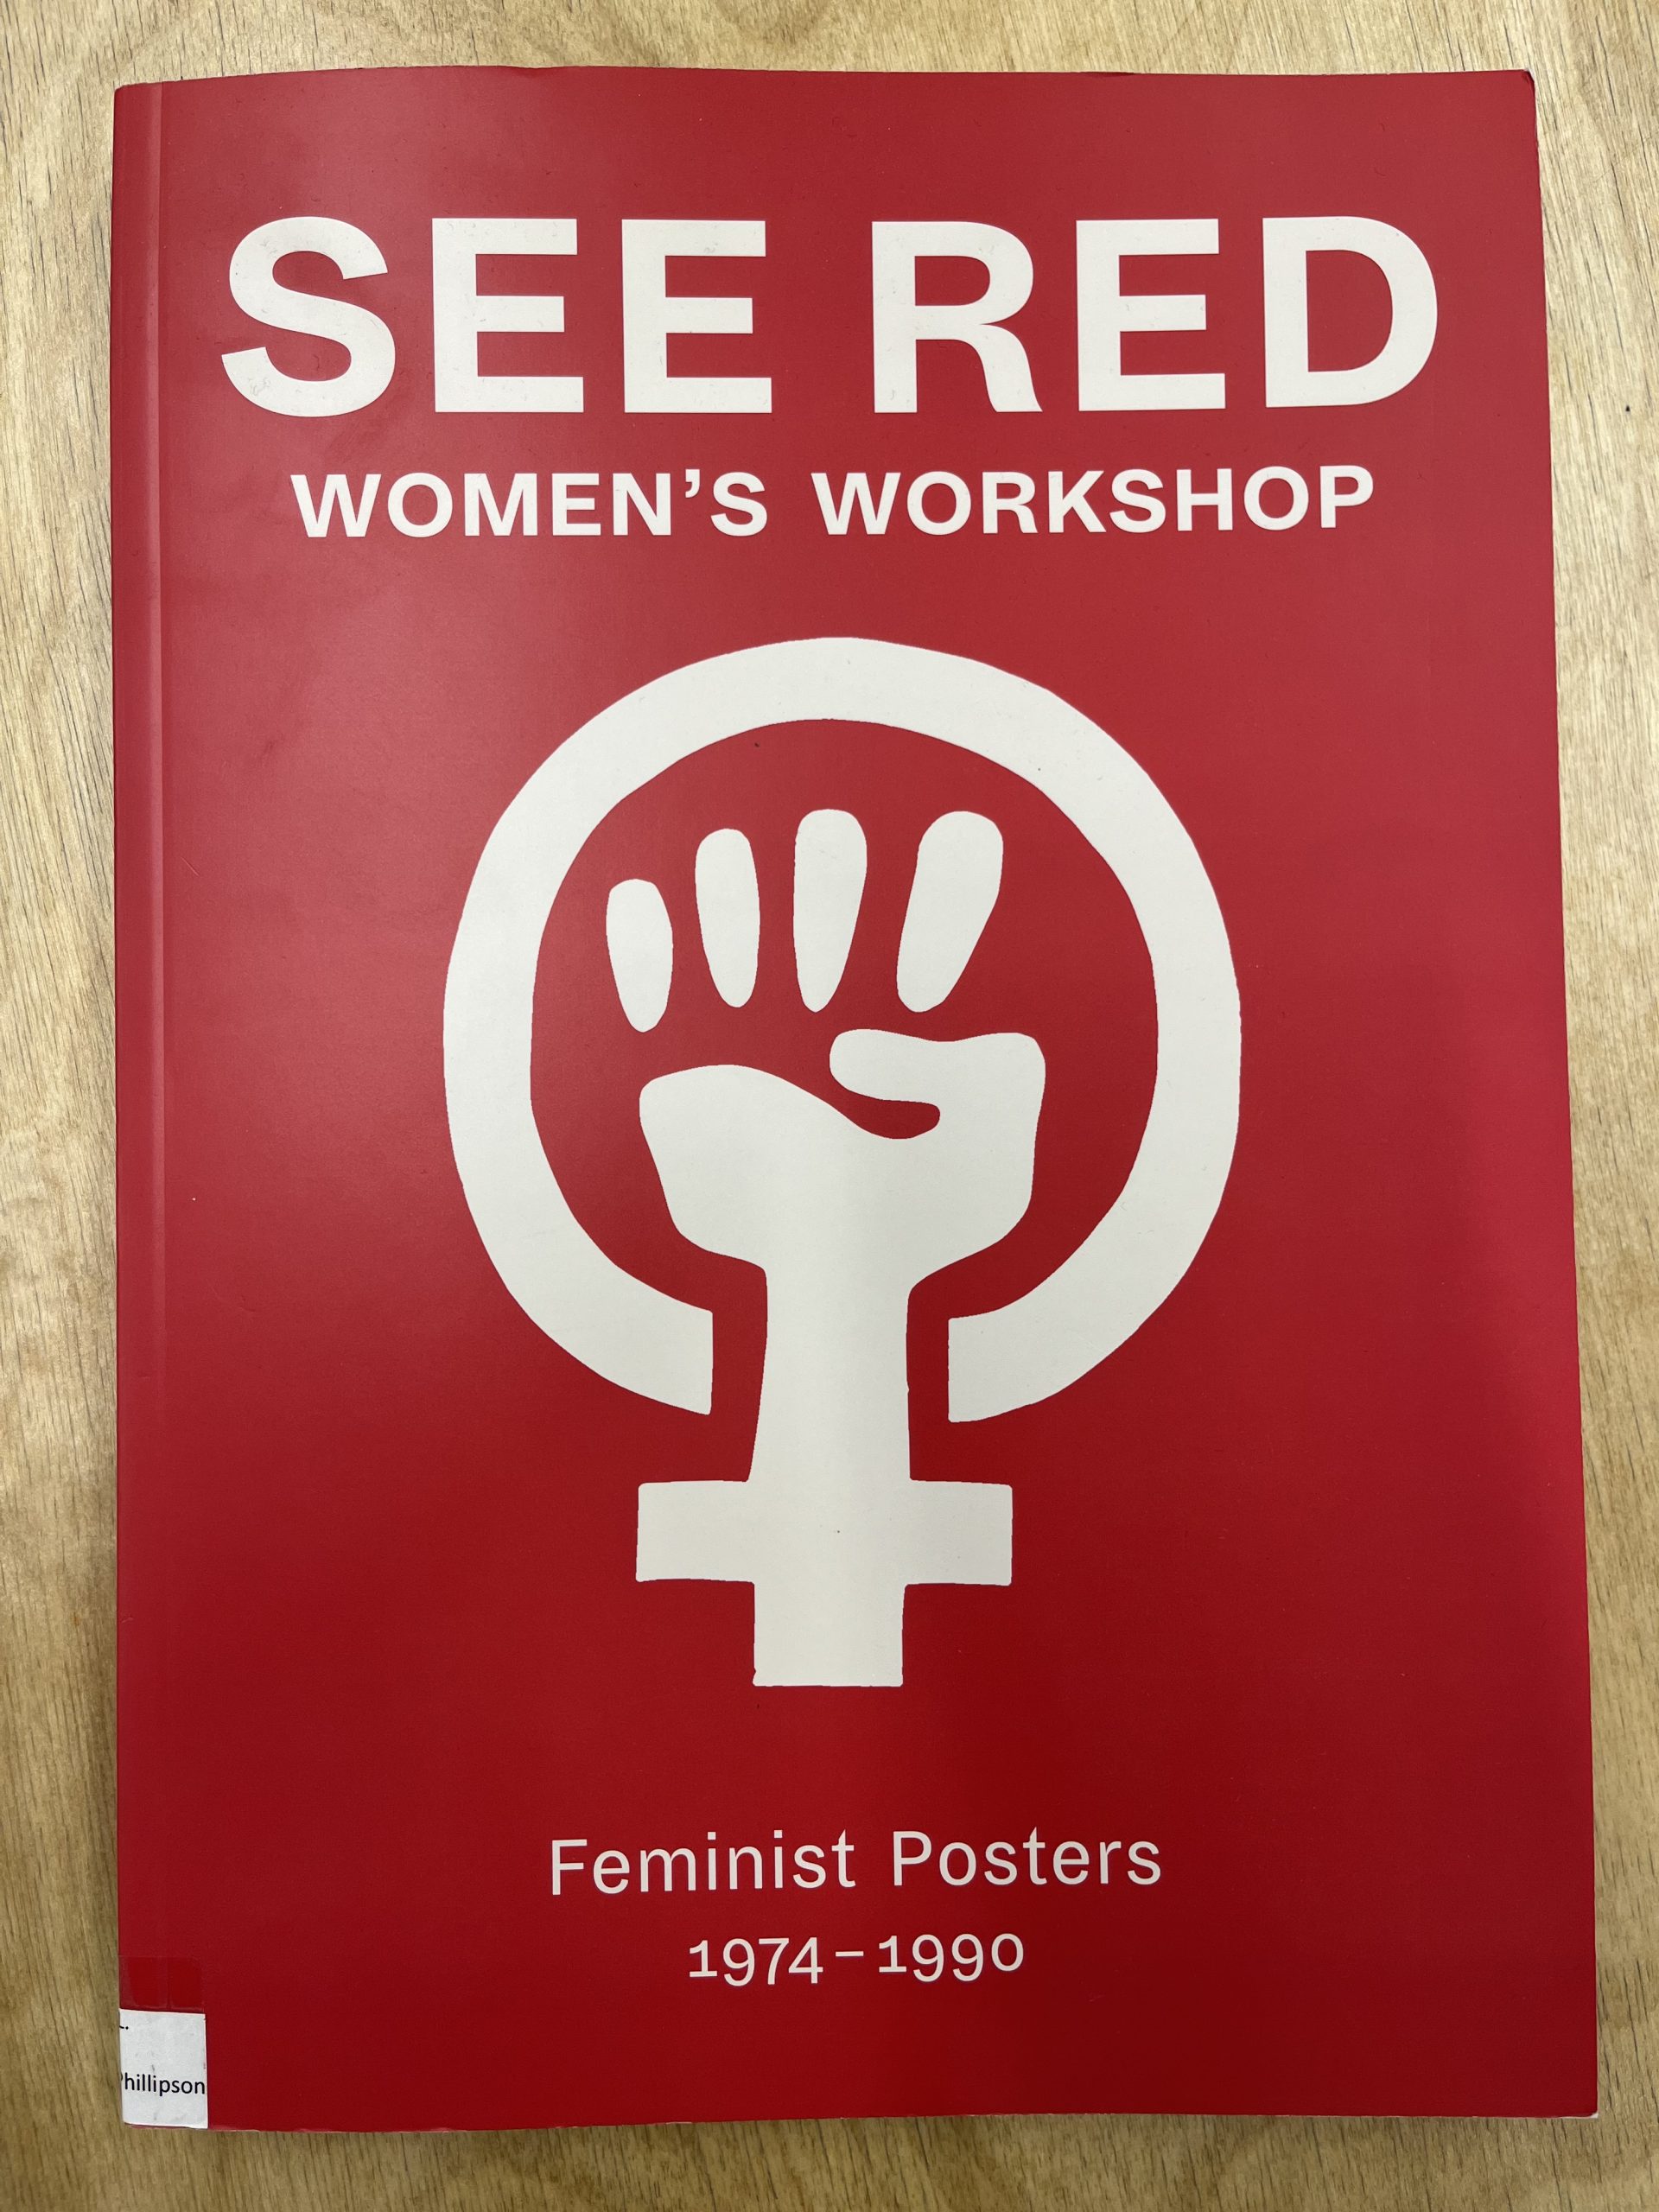 Image of book: See Red Women’s Workshop: Feminist Posters 1974-1990